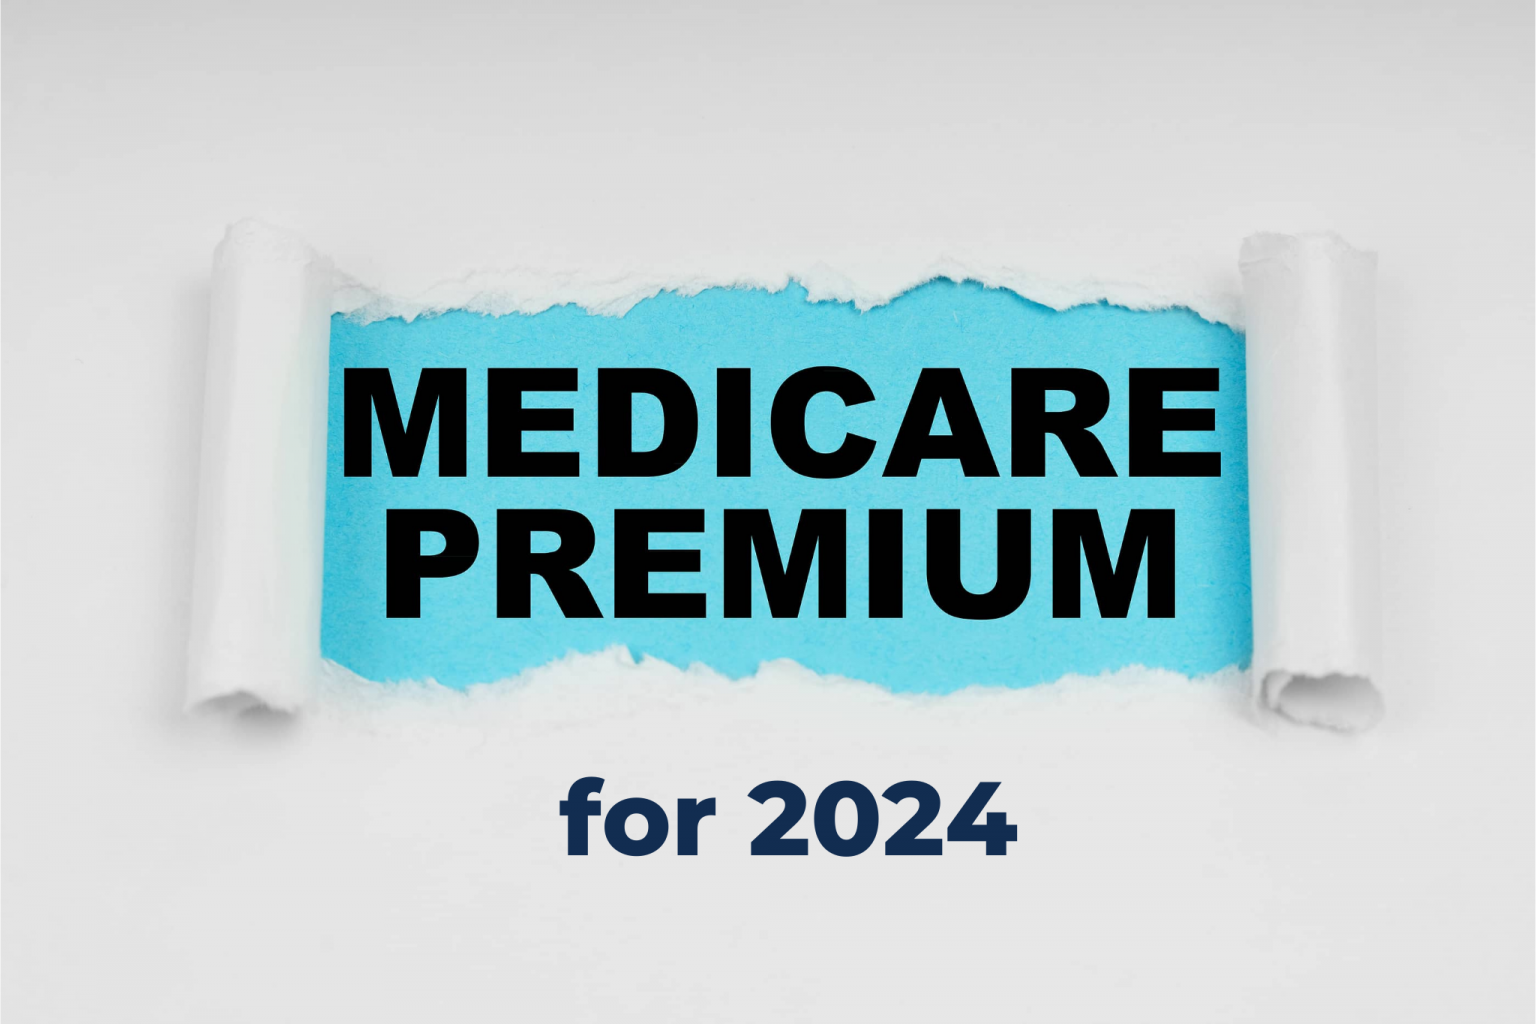 How Much is Medicare Going Up in 2024